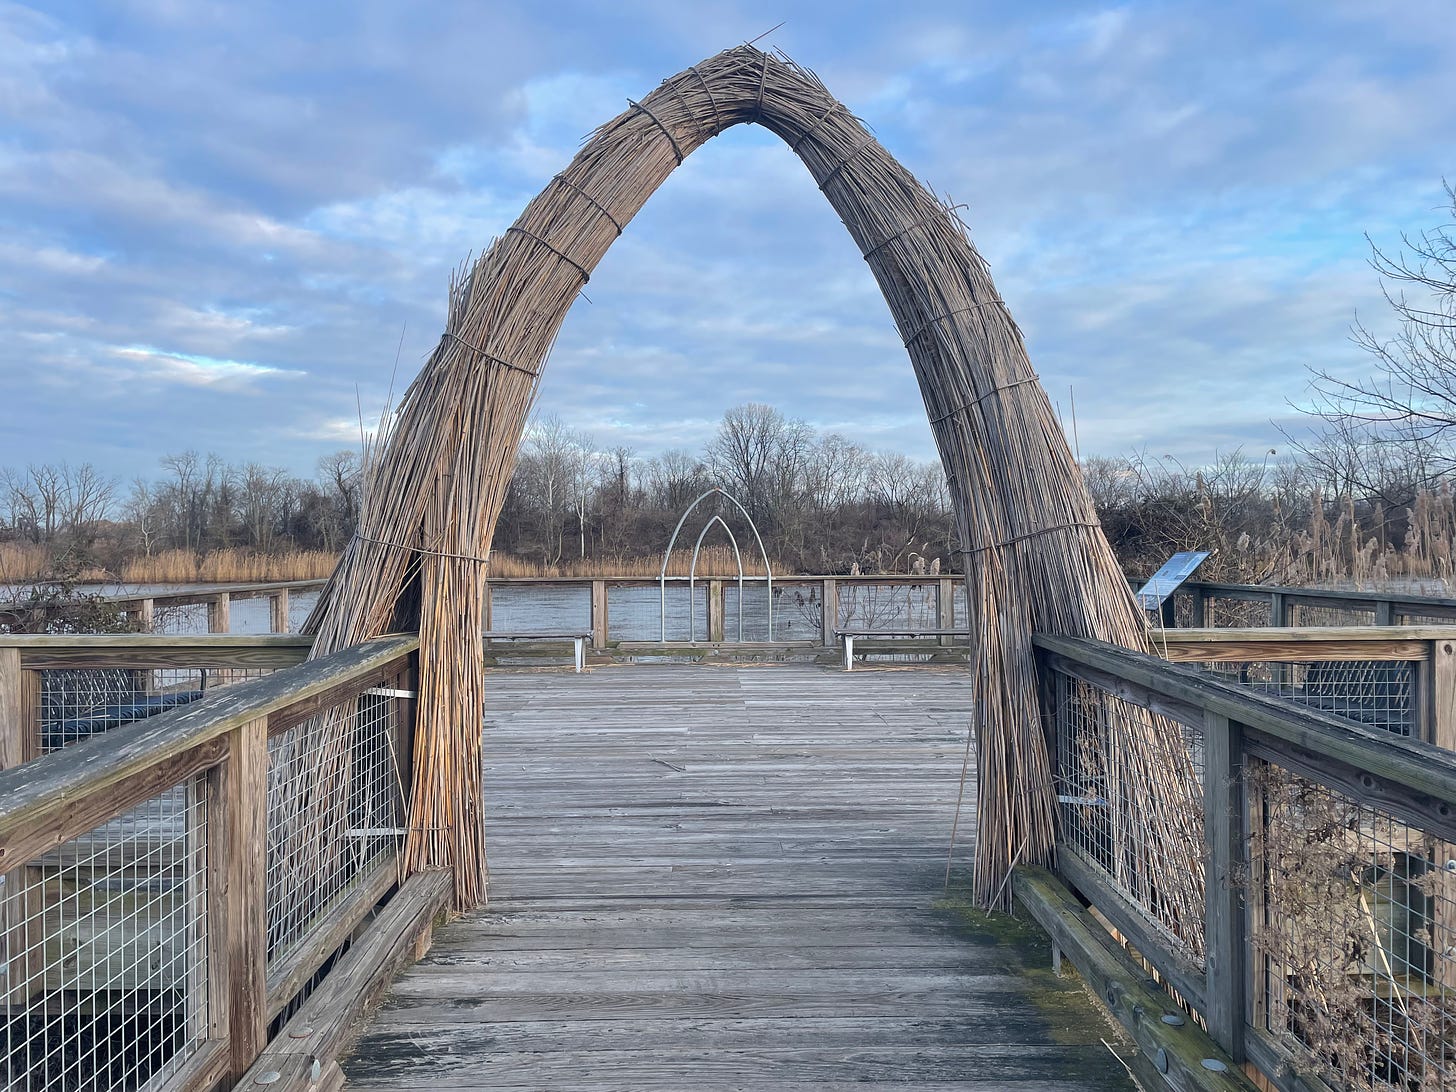 A woven grass arch facing a river on leafless winter's day